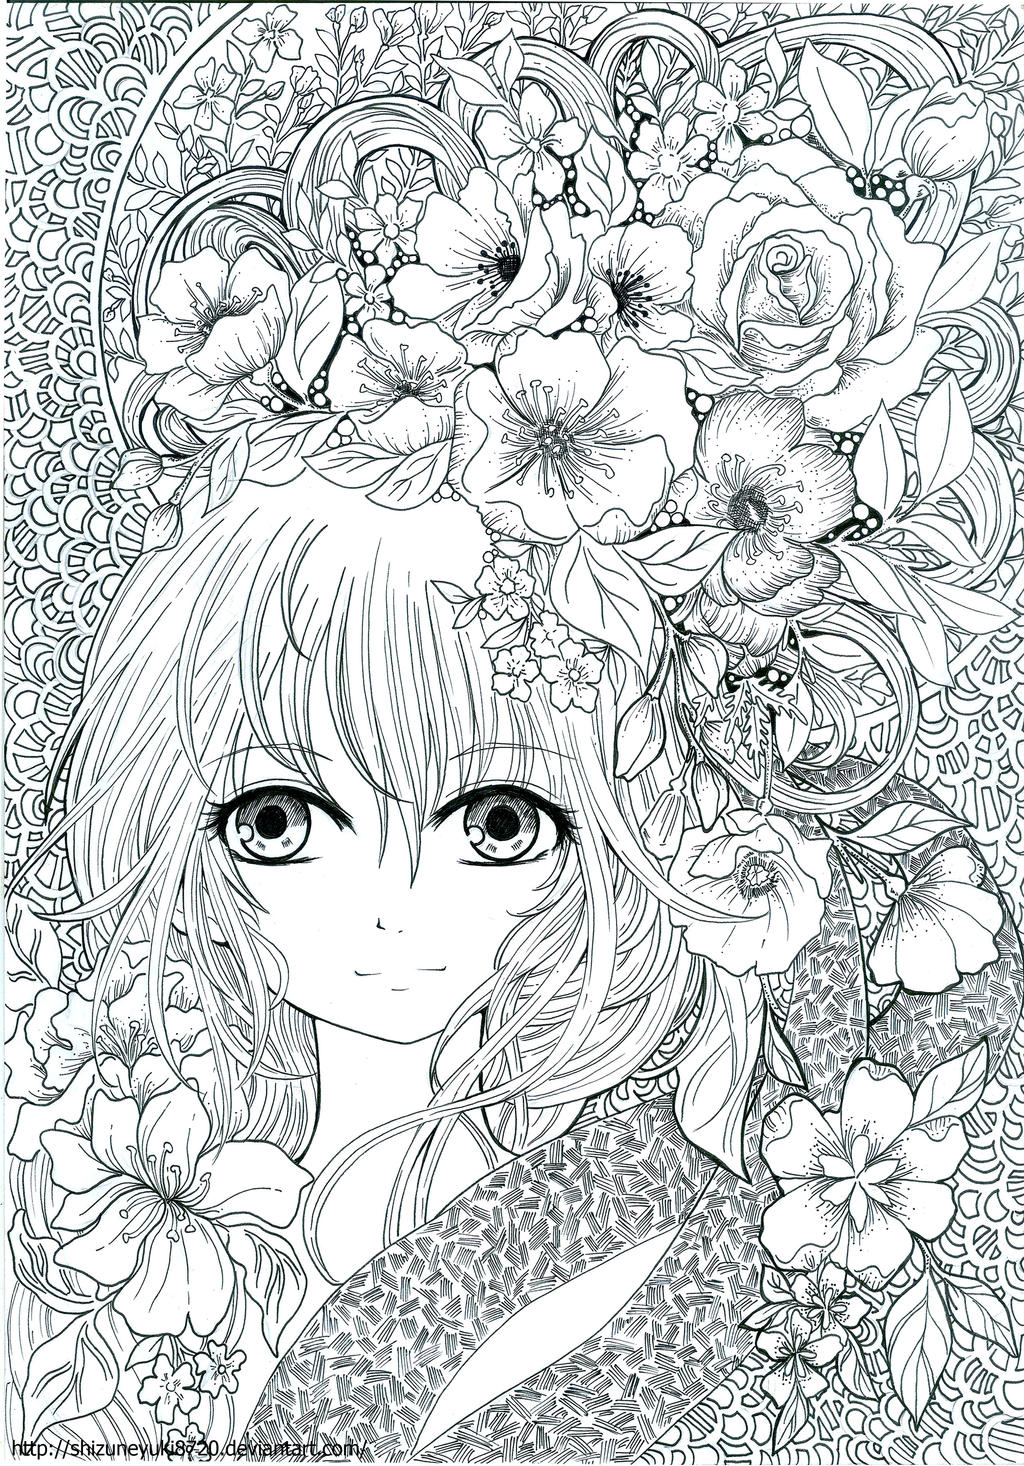 adult-coloring-book-floral-fantasy-page-20-by-shizuneyuki8720-on-deviantart